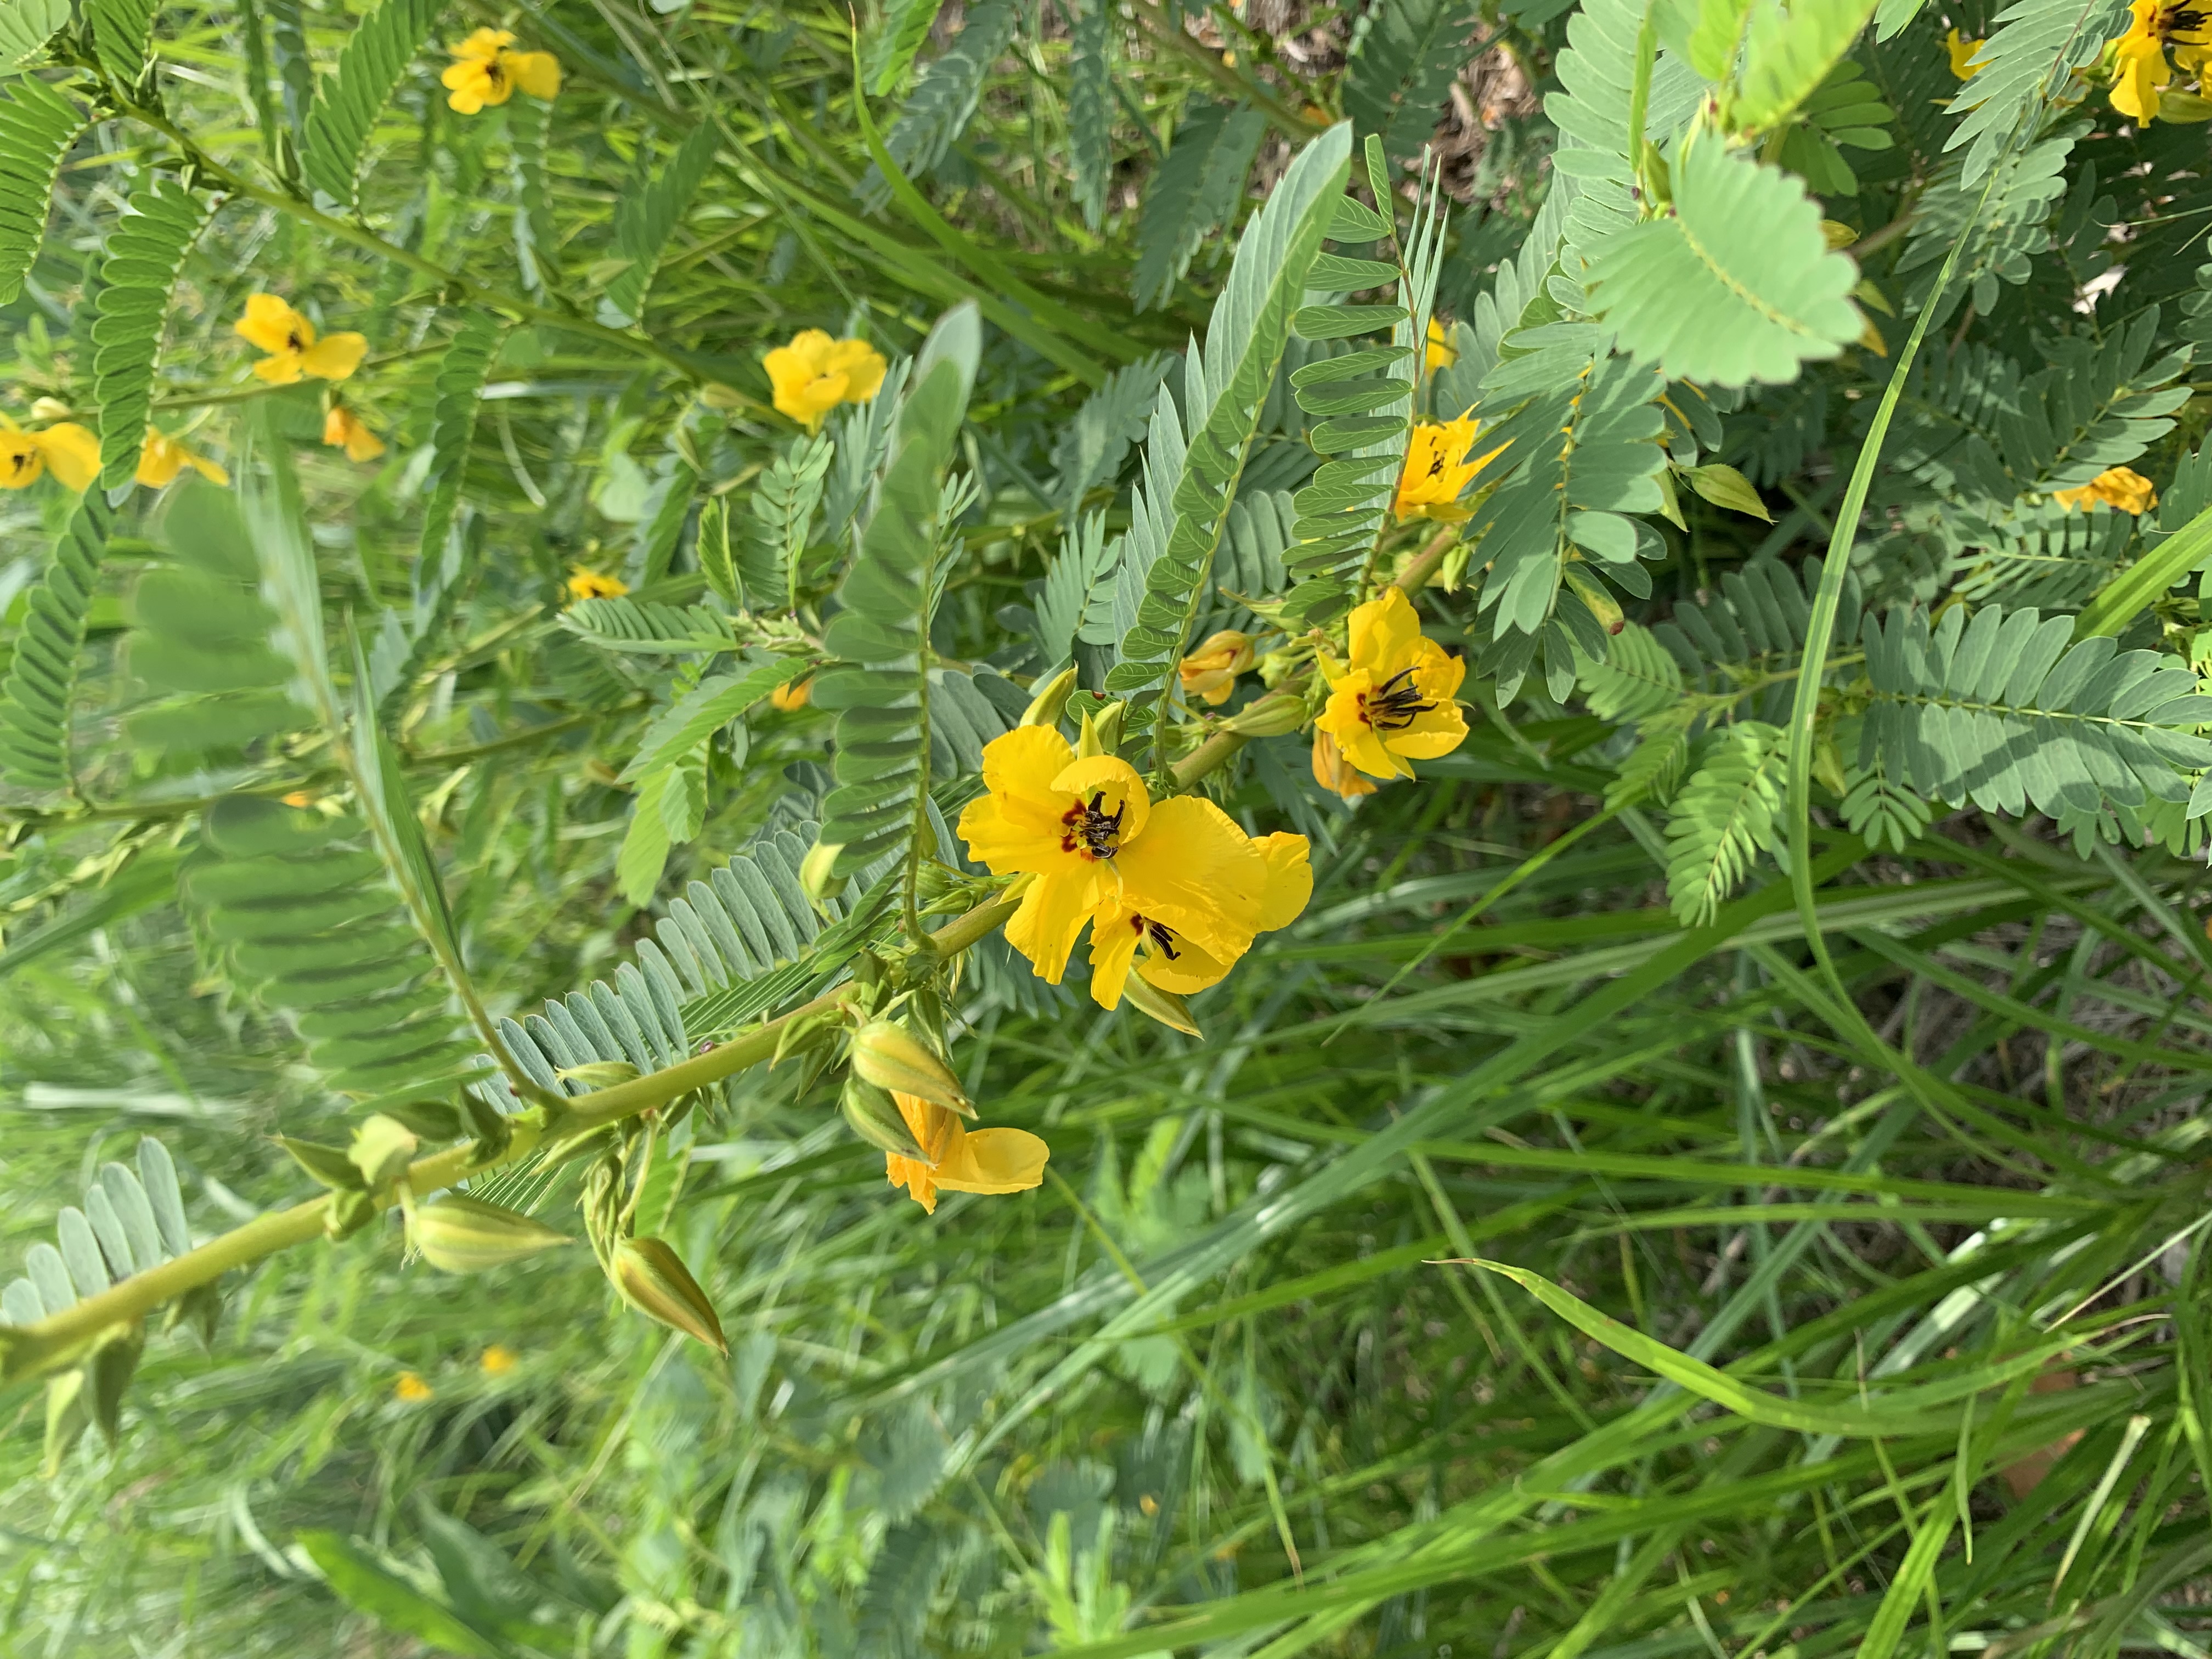 A plant with large yellow flowers